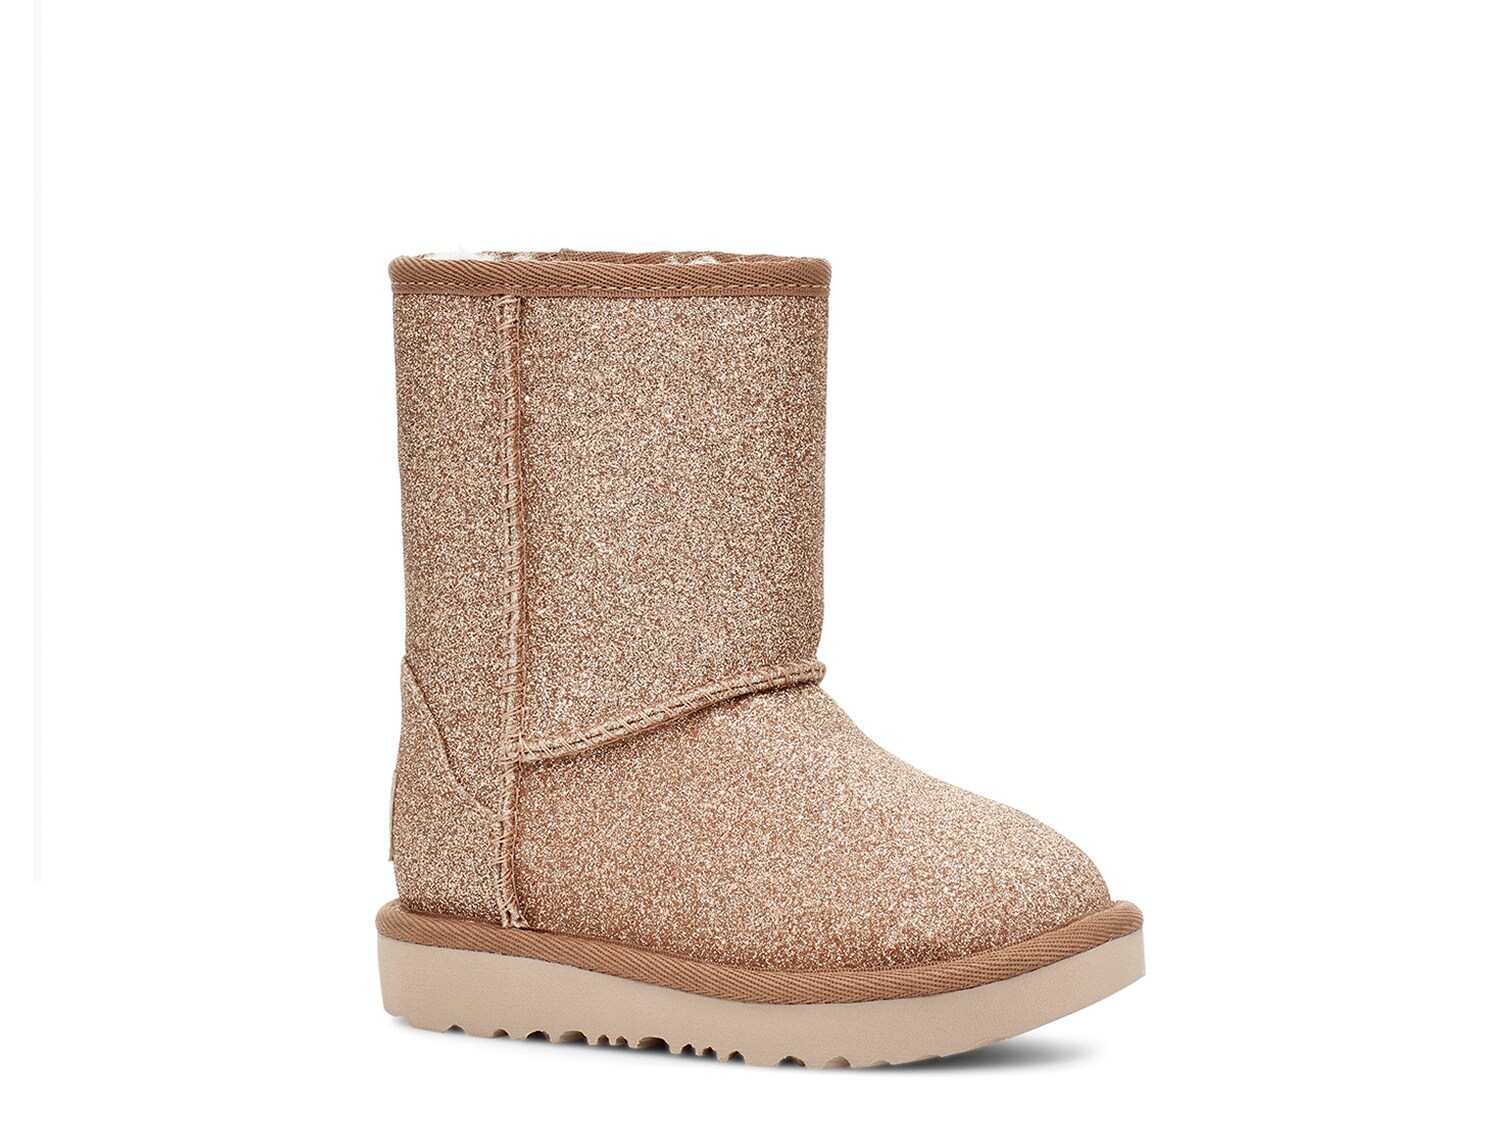 uggs boots womens dsw